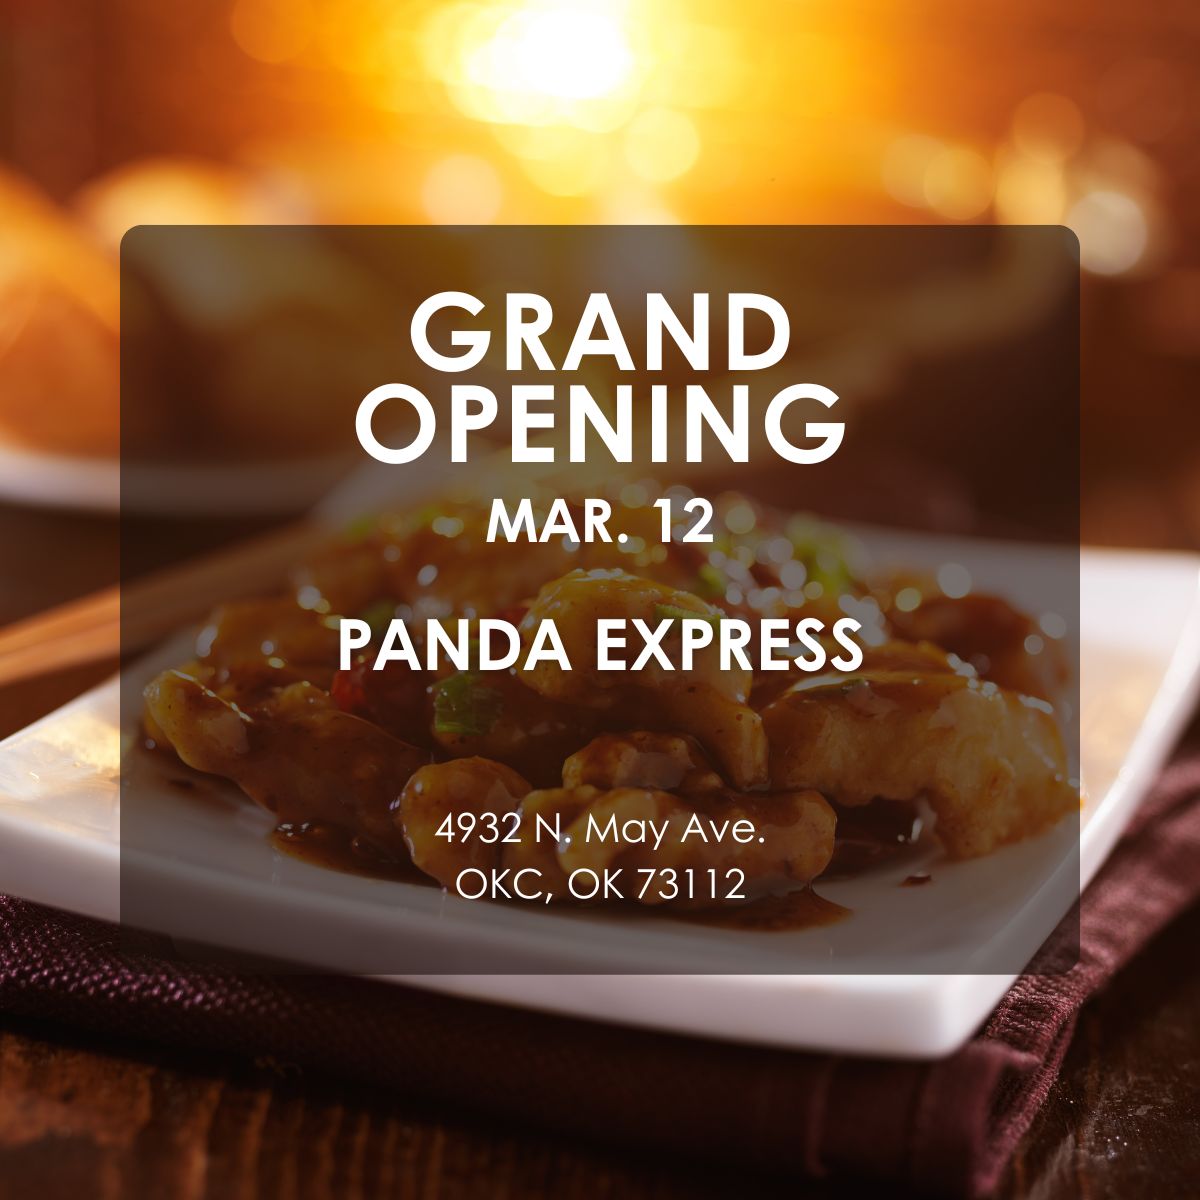 Don't miss out on the excitement at Panda Express Grand Opening on Tuesday, Mar 12! Be among the first 88 attendees at the ribbon-cutting ceremony to score a free Panda Express tee. Ribbon cutting: 9:45 a.m.